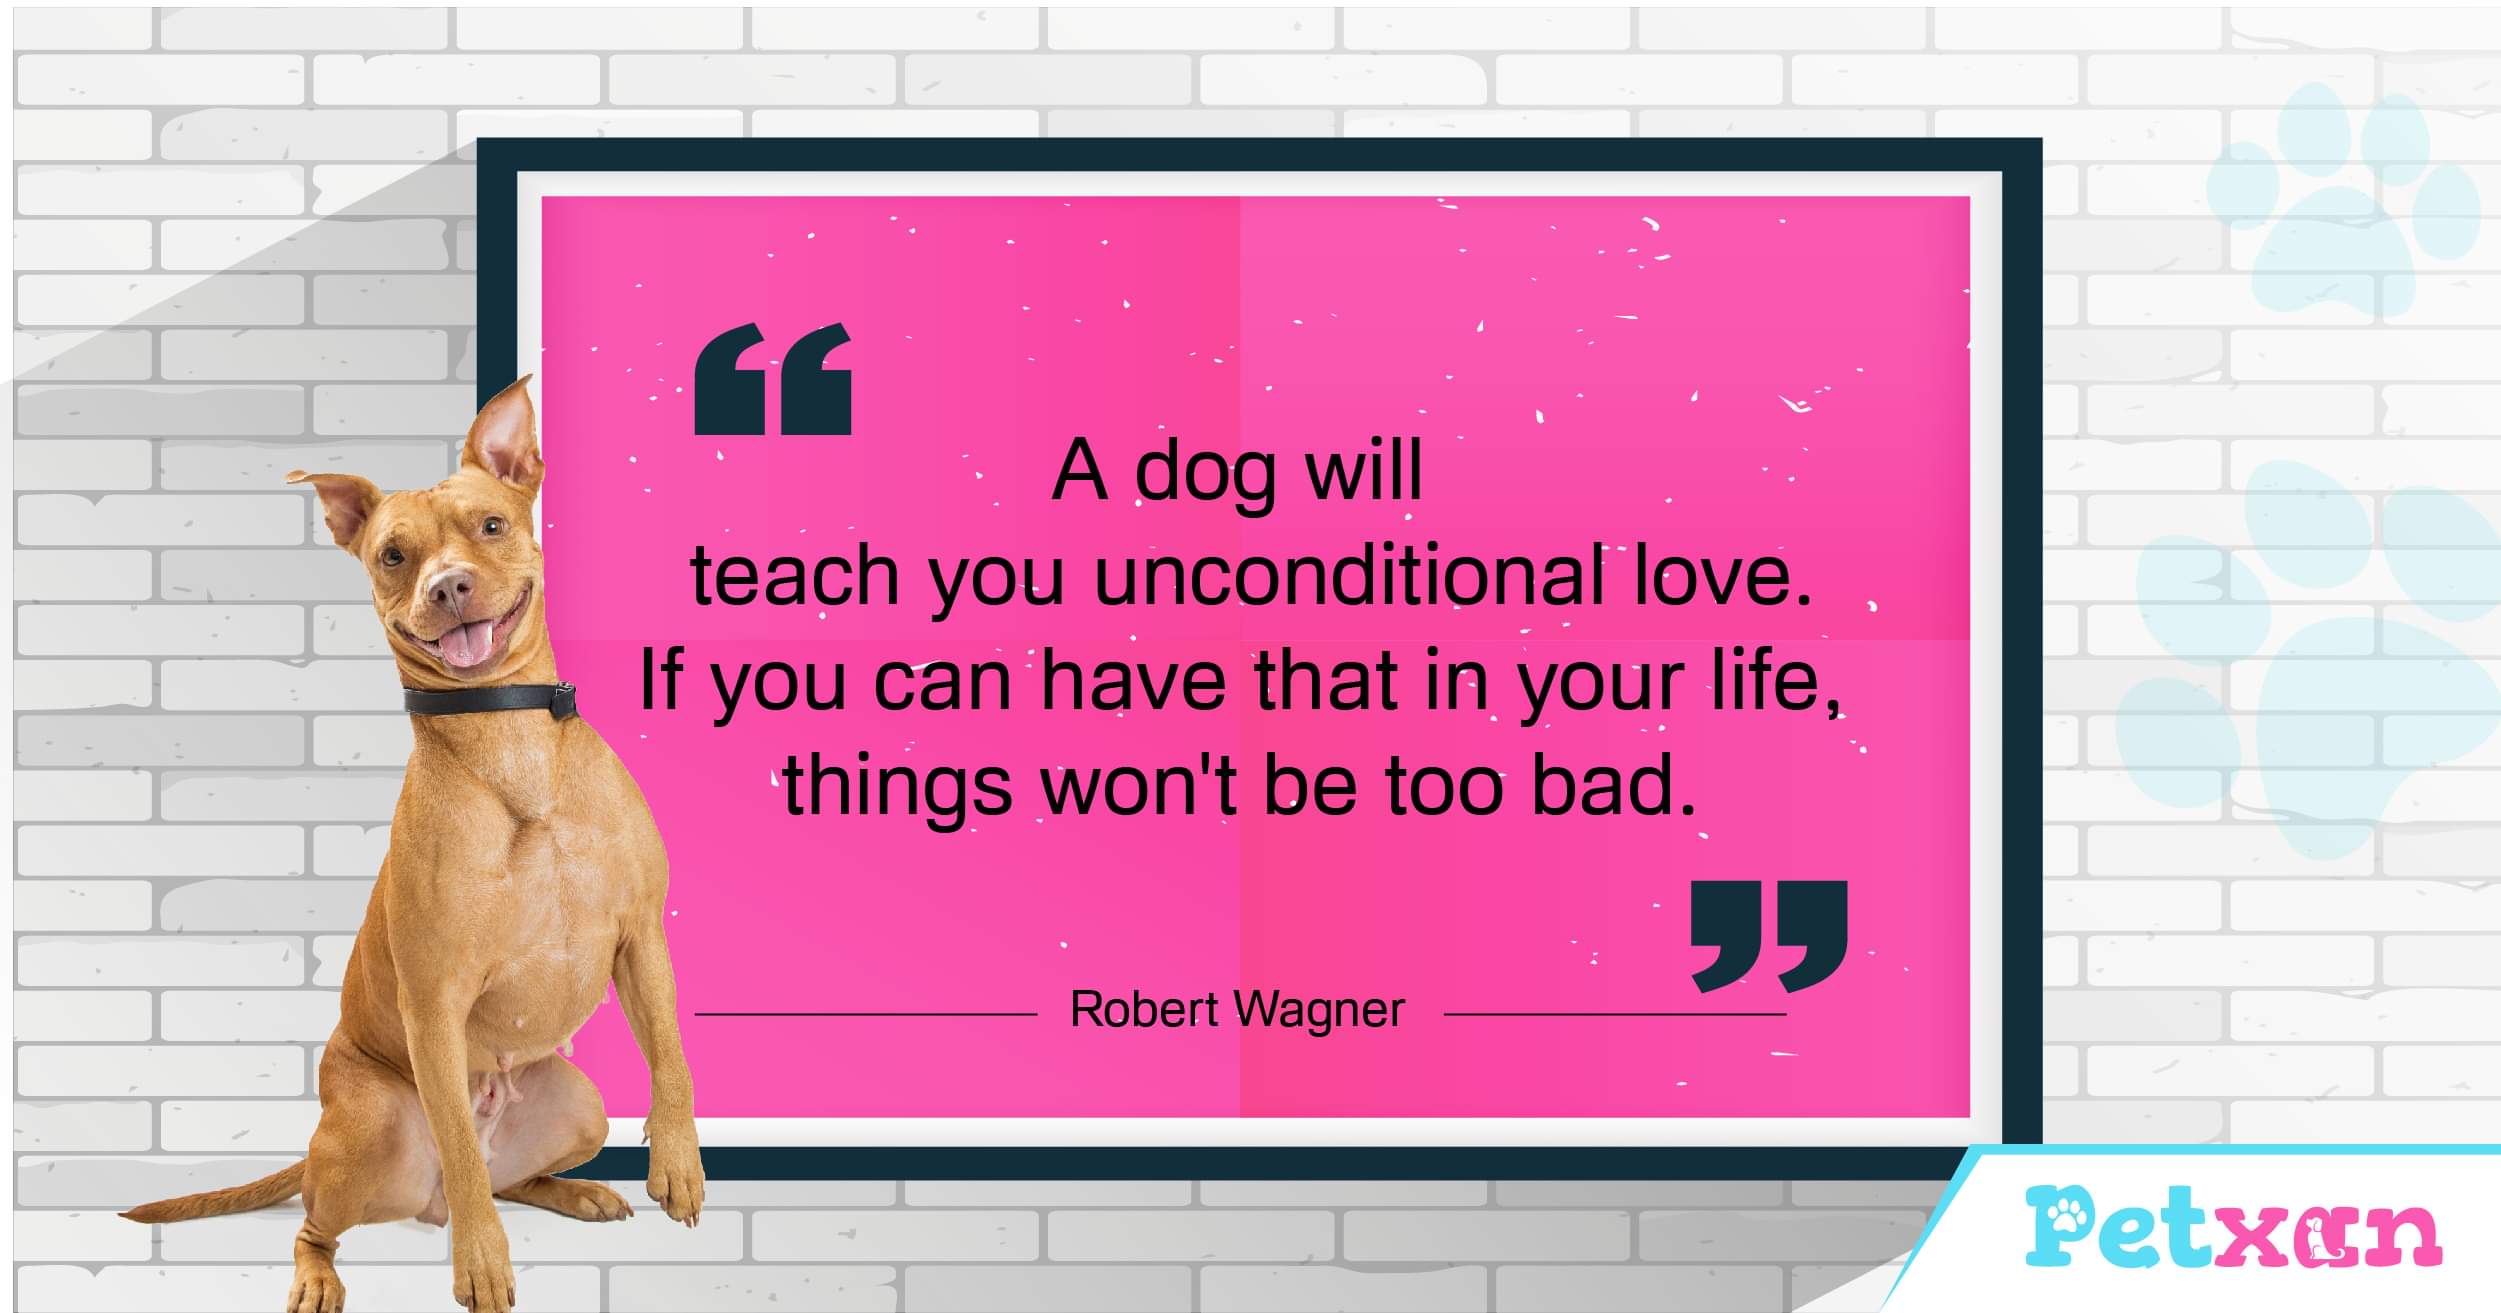 Dog Love Quote about unconditional Love